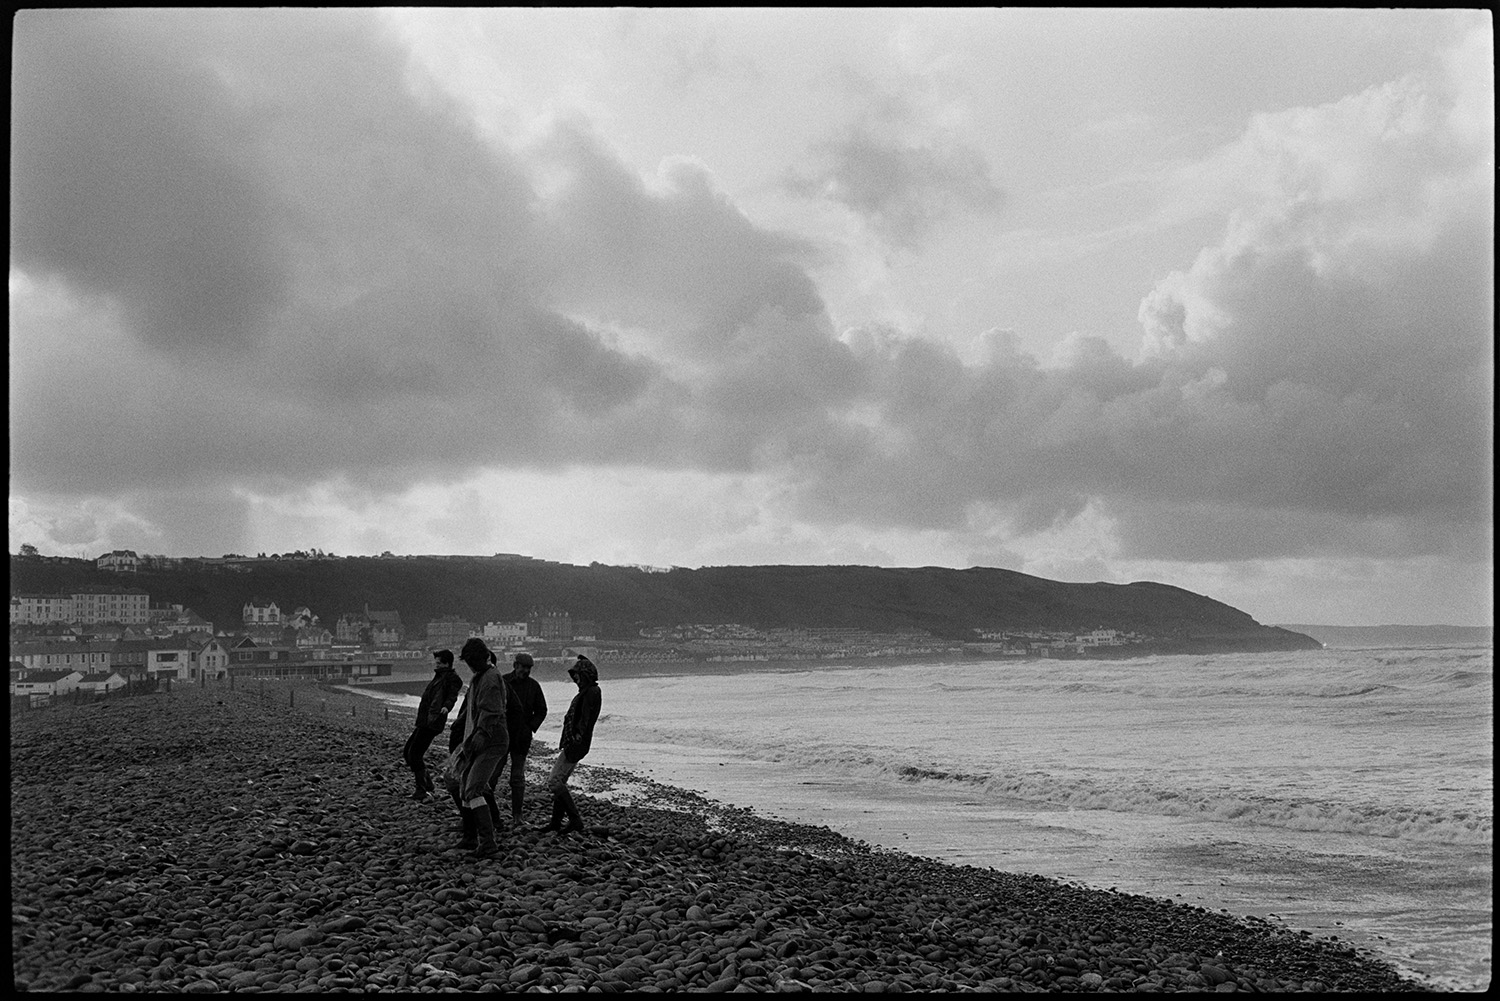 People walking beside stormy sea, leaning on the wind.
[Lord Clinton and friends standing on Westward Ho! pebble ridge, leaning into the wind. Views of the beach and coastal buildings are visible in the background.]